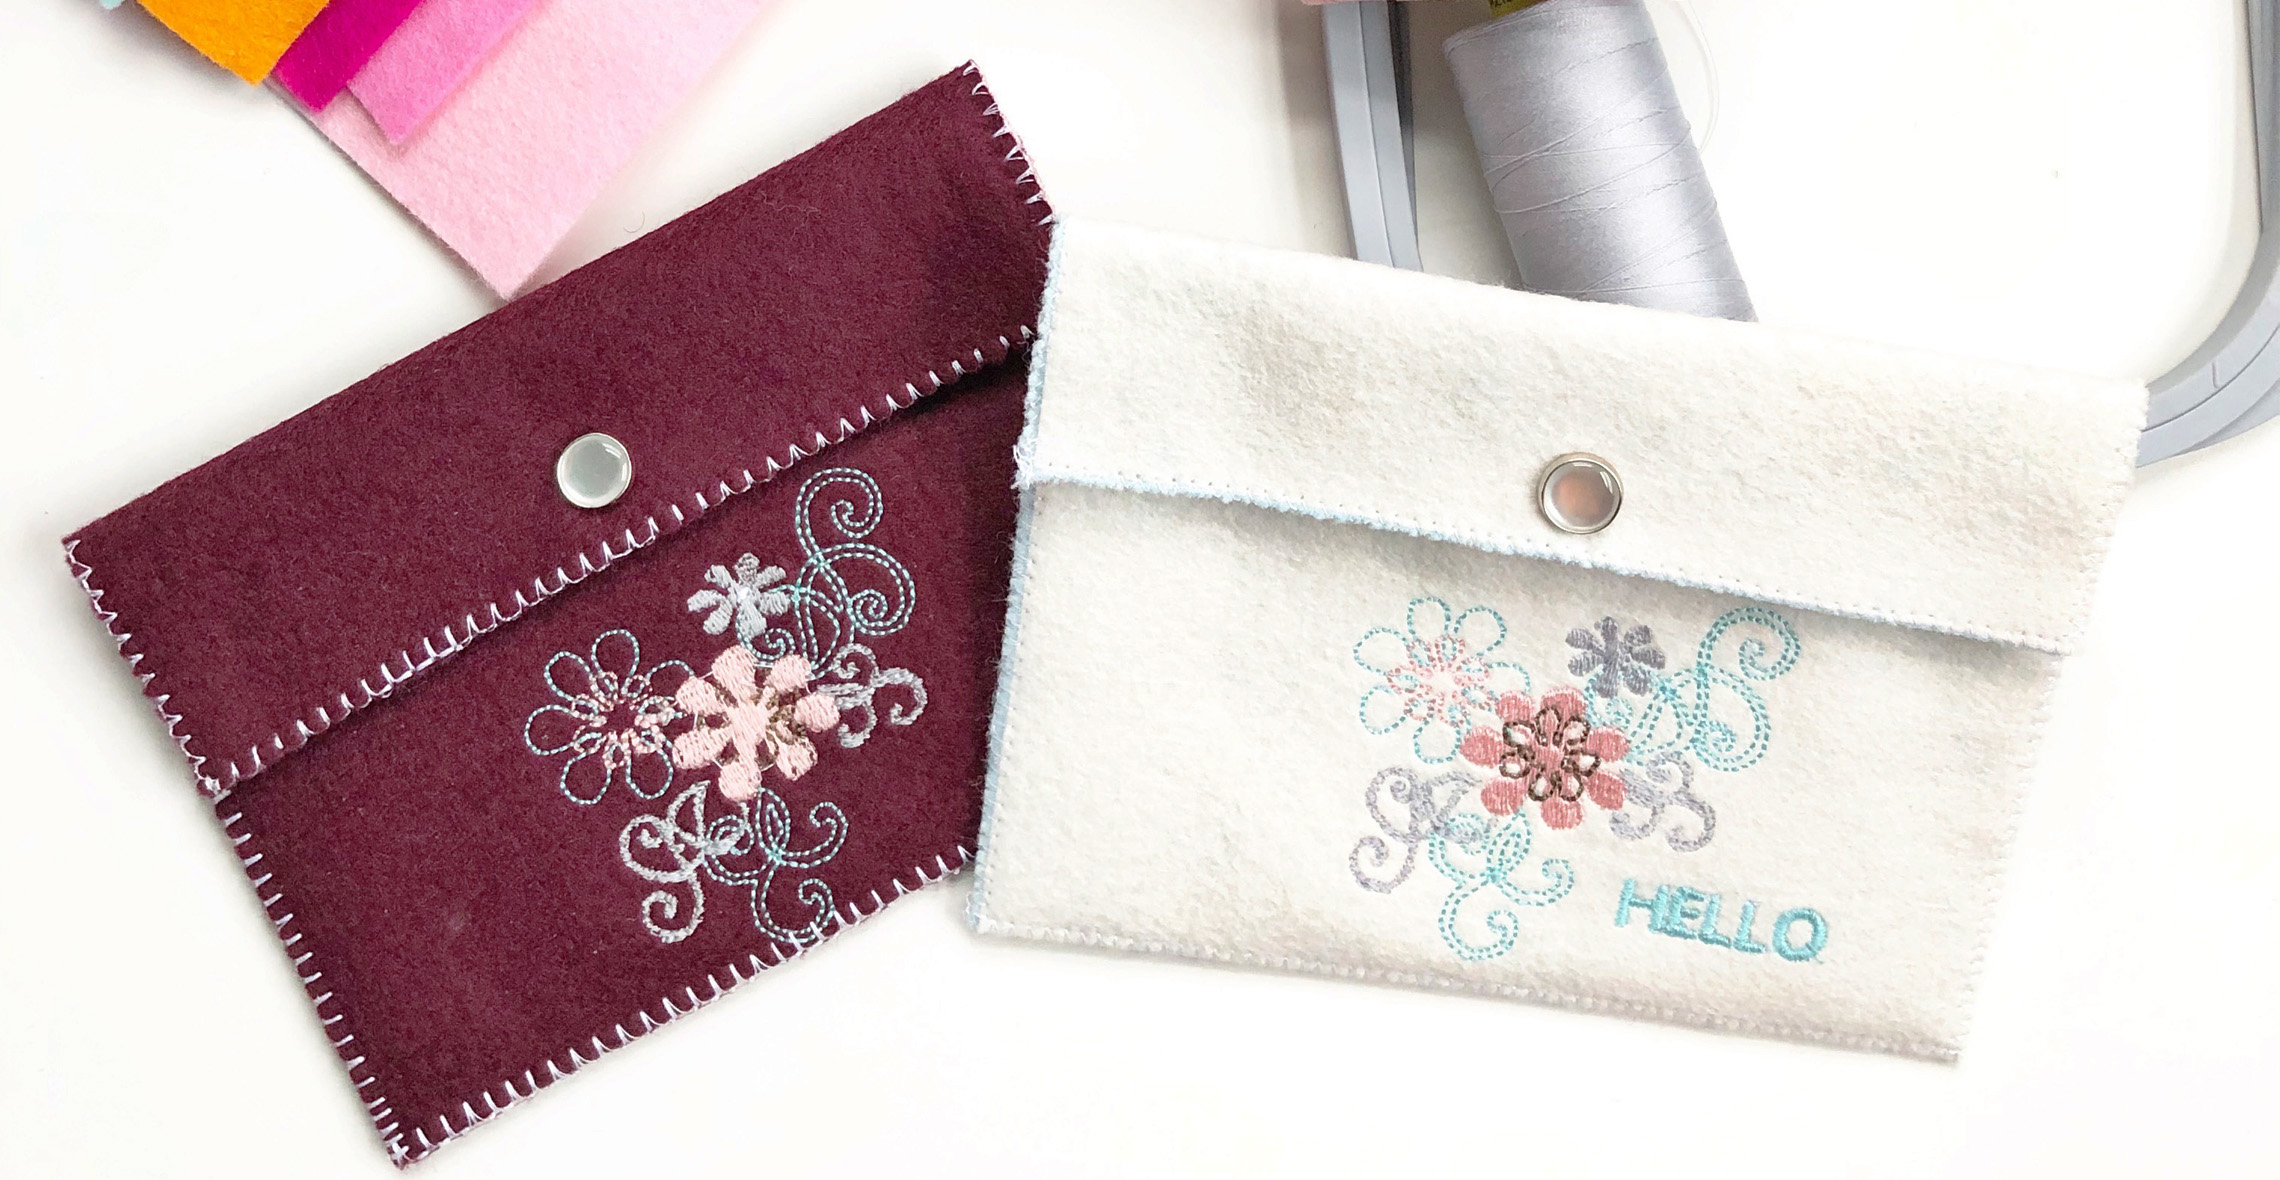 Embroidered Felt Pouches from WeAllSew